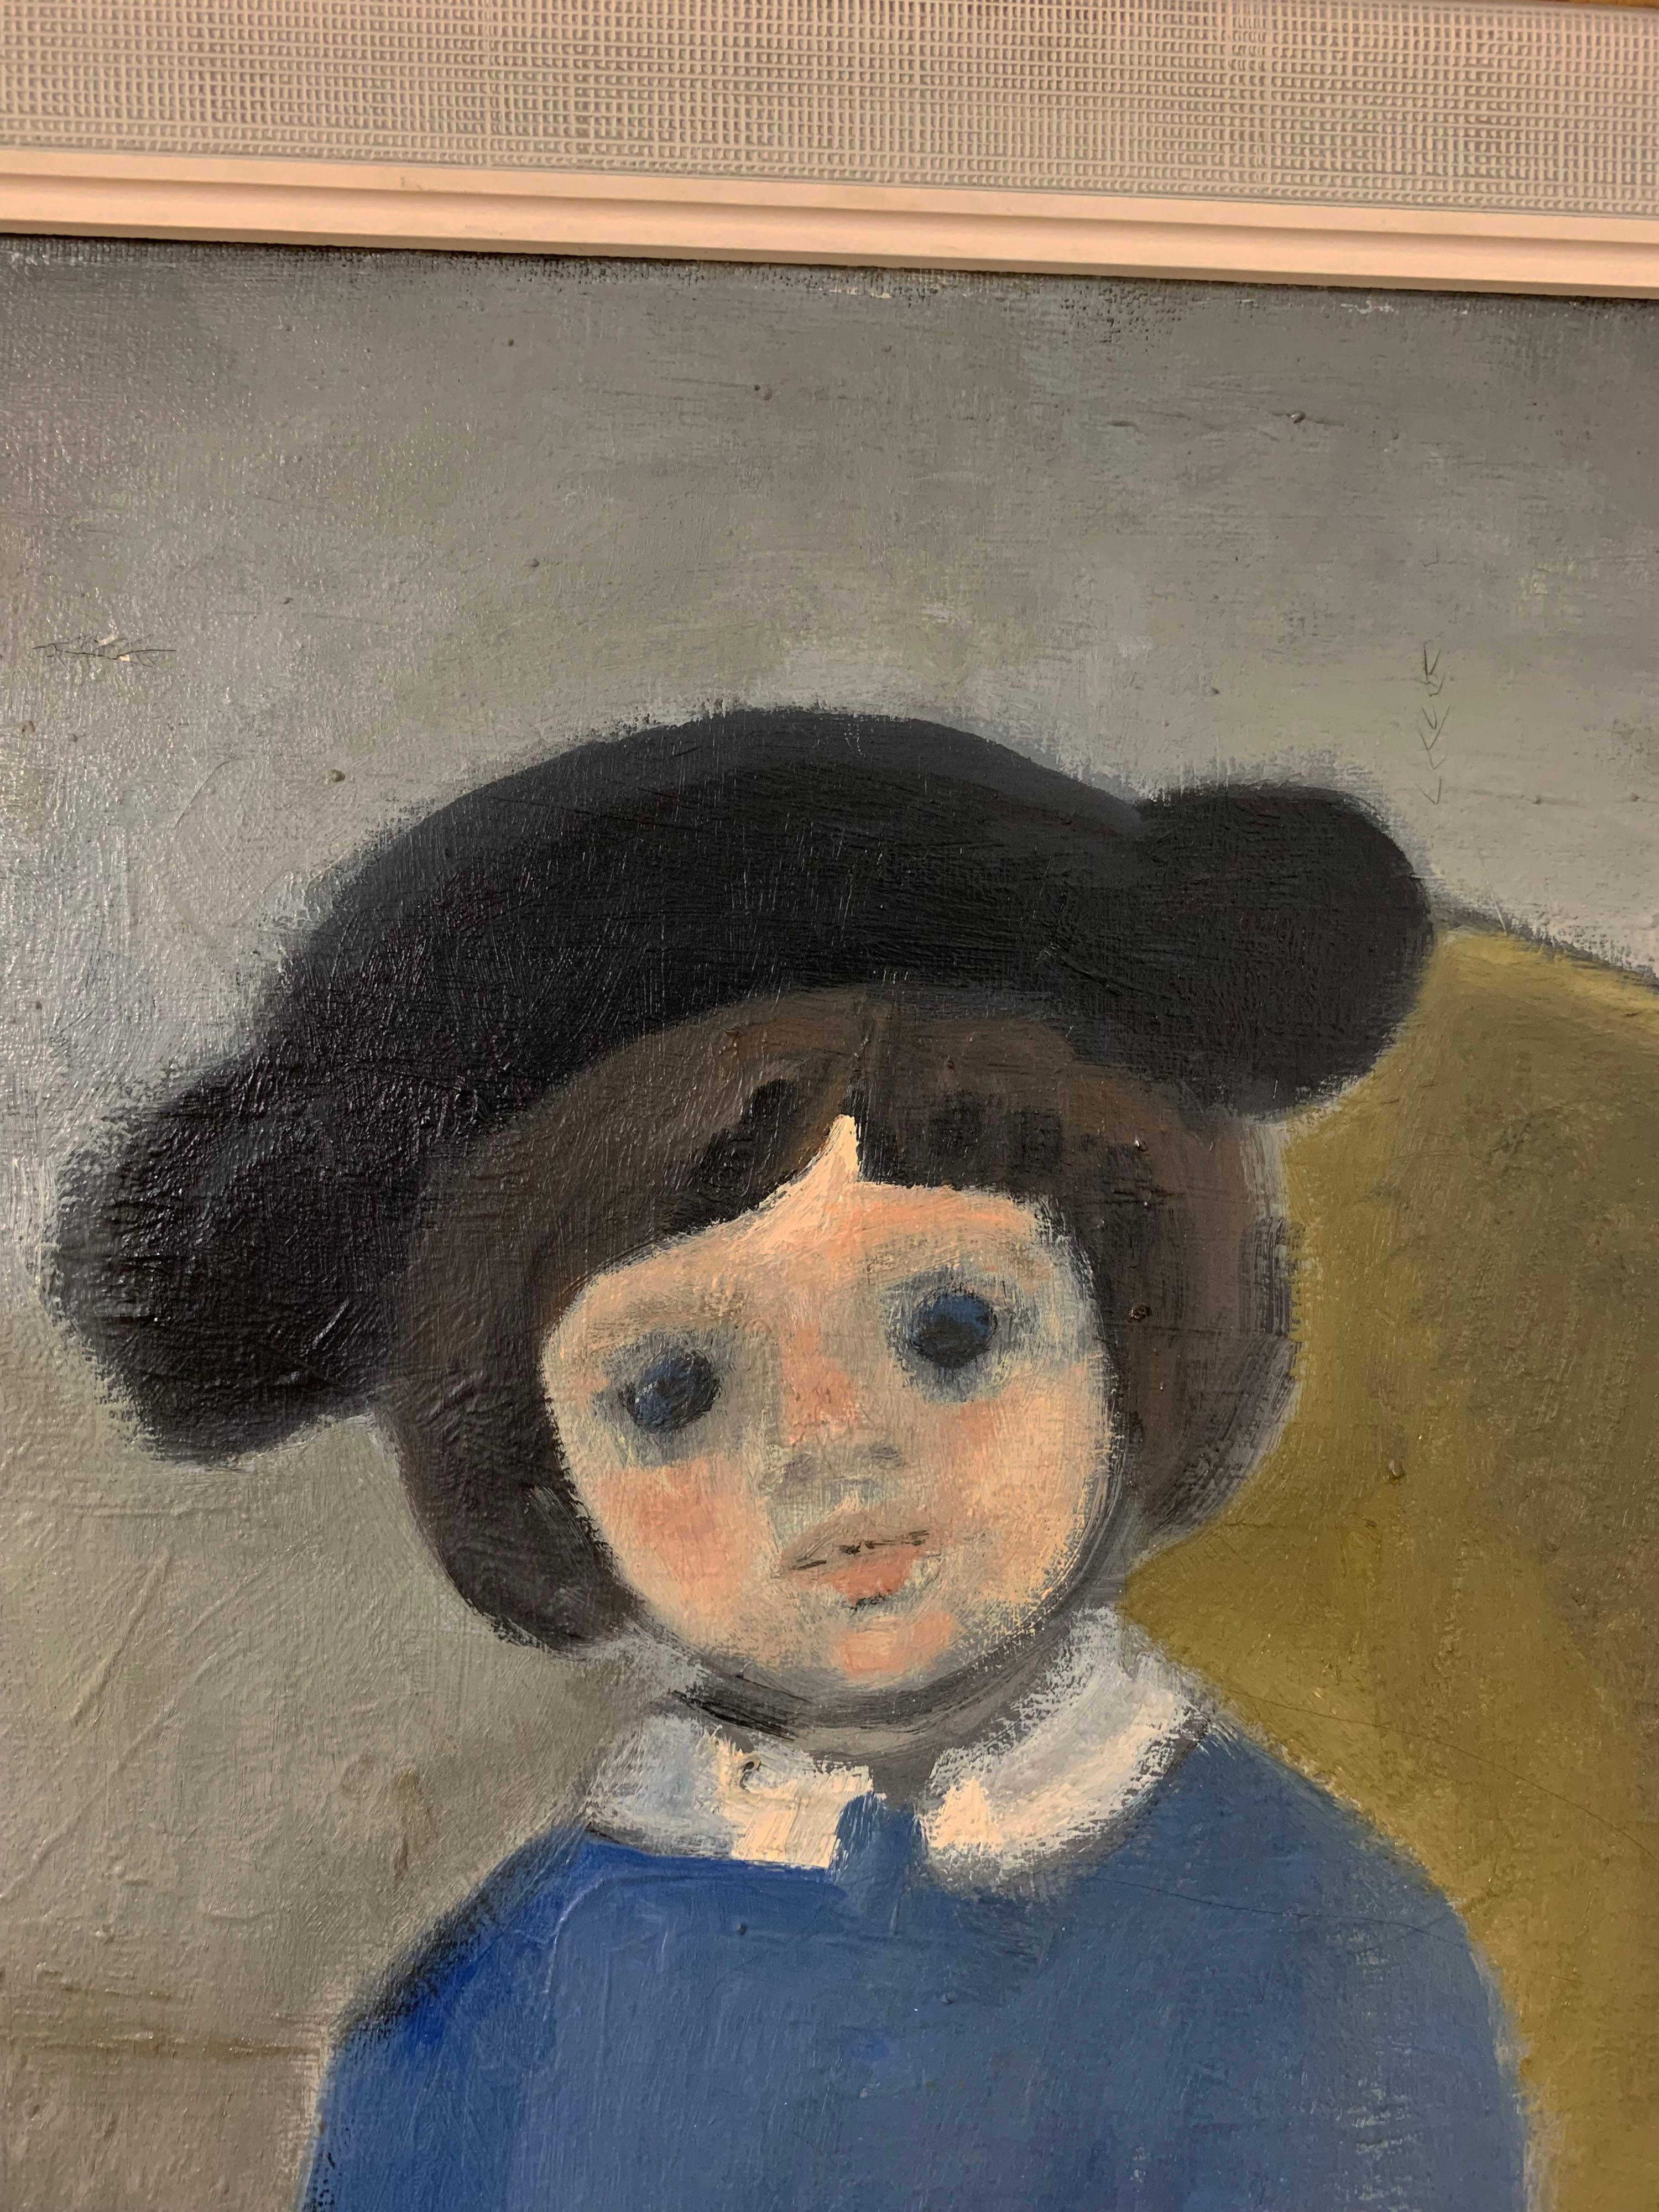 Painting of the young girl wearing a montera by Spanish artist Sophia Morales. Purchased from her exhibition at the Kreisler Gallery in Madrid in 1967. Copy of exhibition catalog included with purchase.